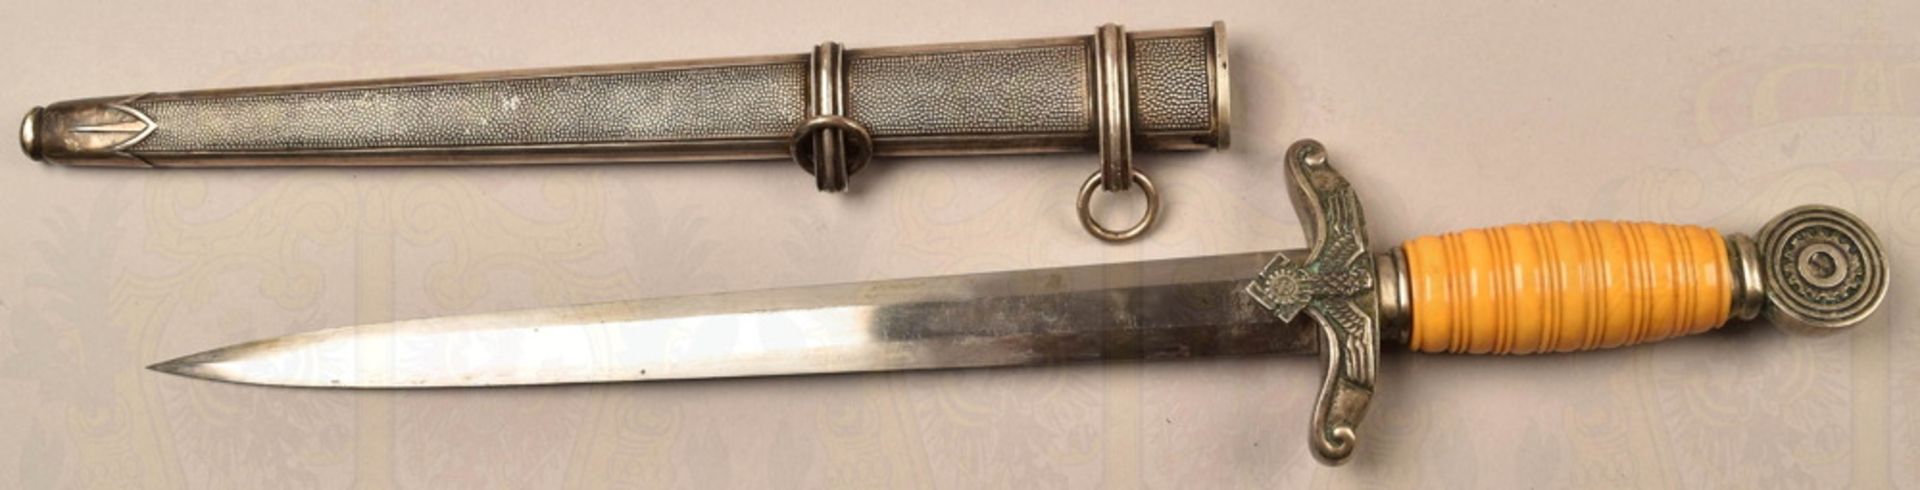 Dagger for TeNo leaders with corresponding scabbard - Image 2 of 9